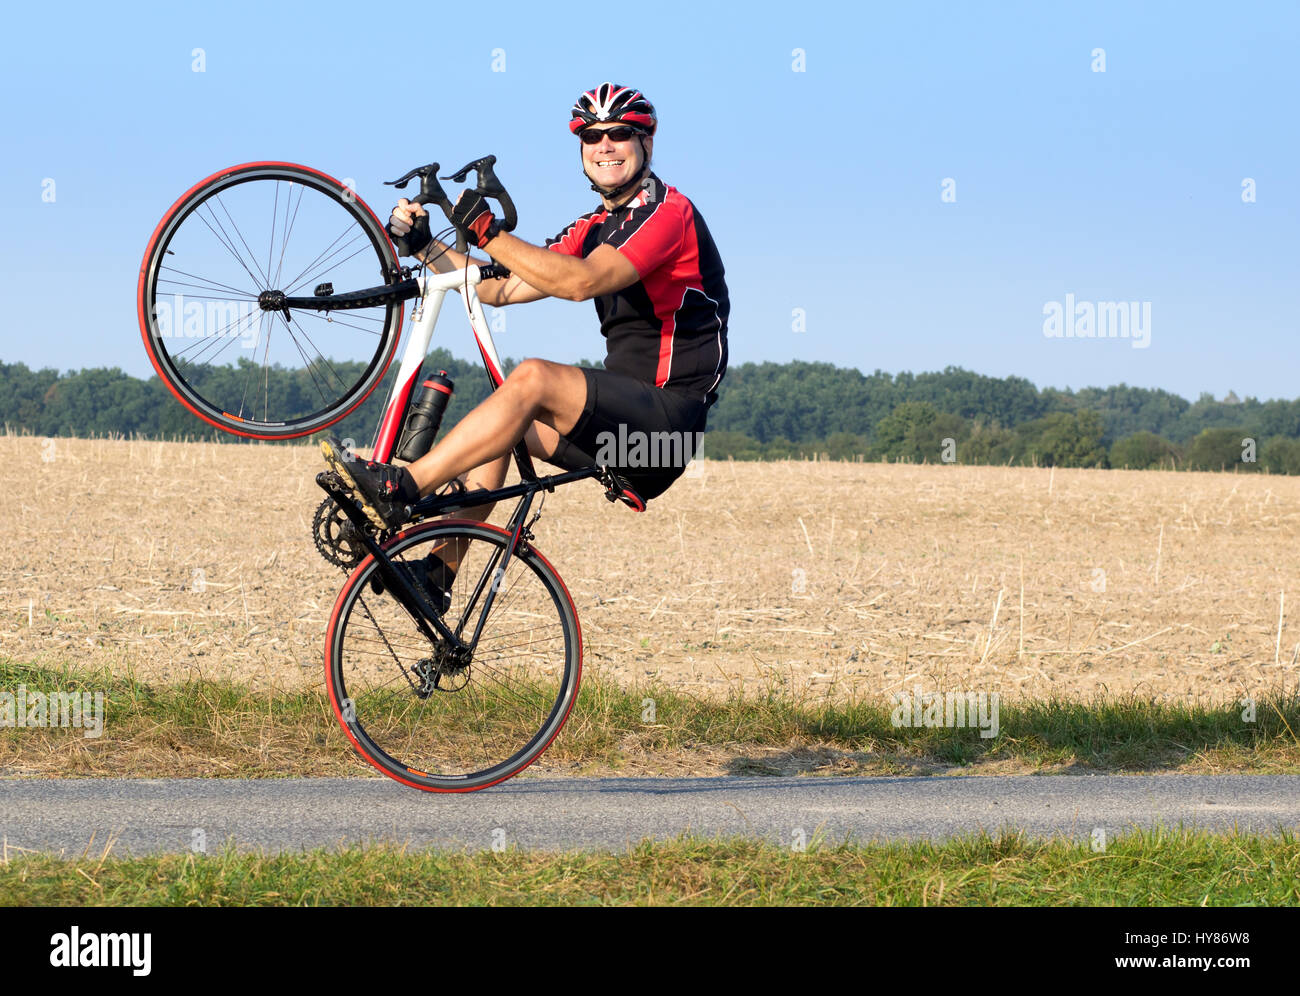 Cheerful cyclist riding on the rear wheel. Biker balancing while driving on a road bike. Risky ride on one wheel. Stock Photo